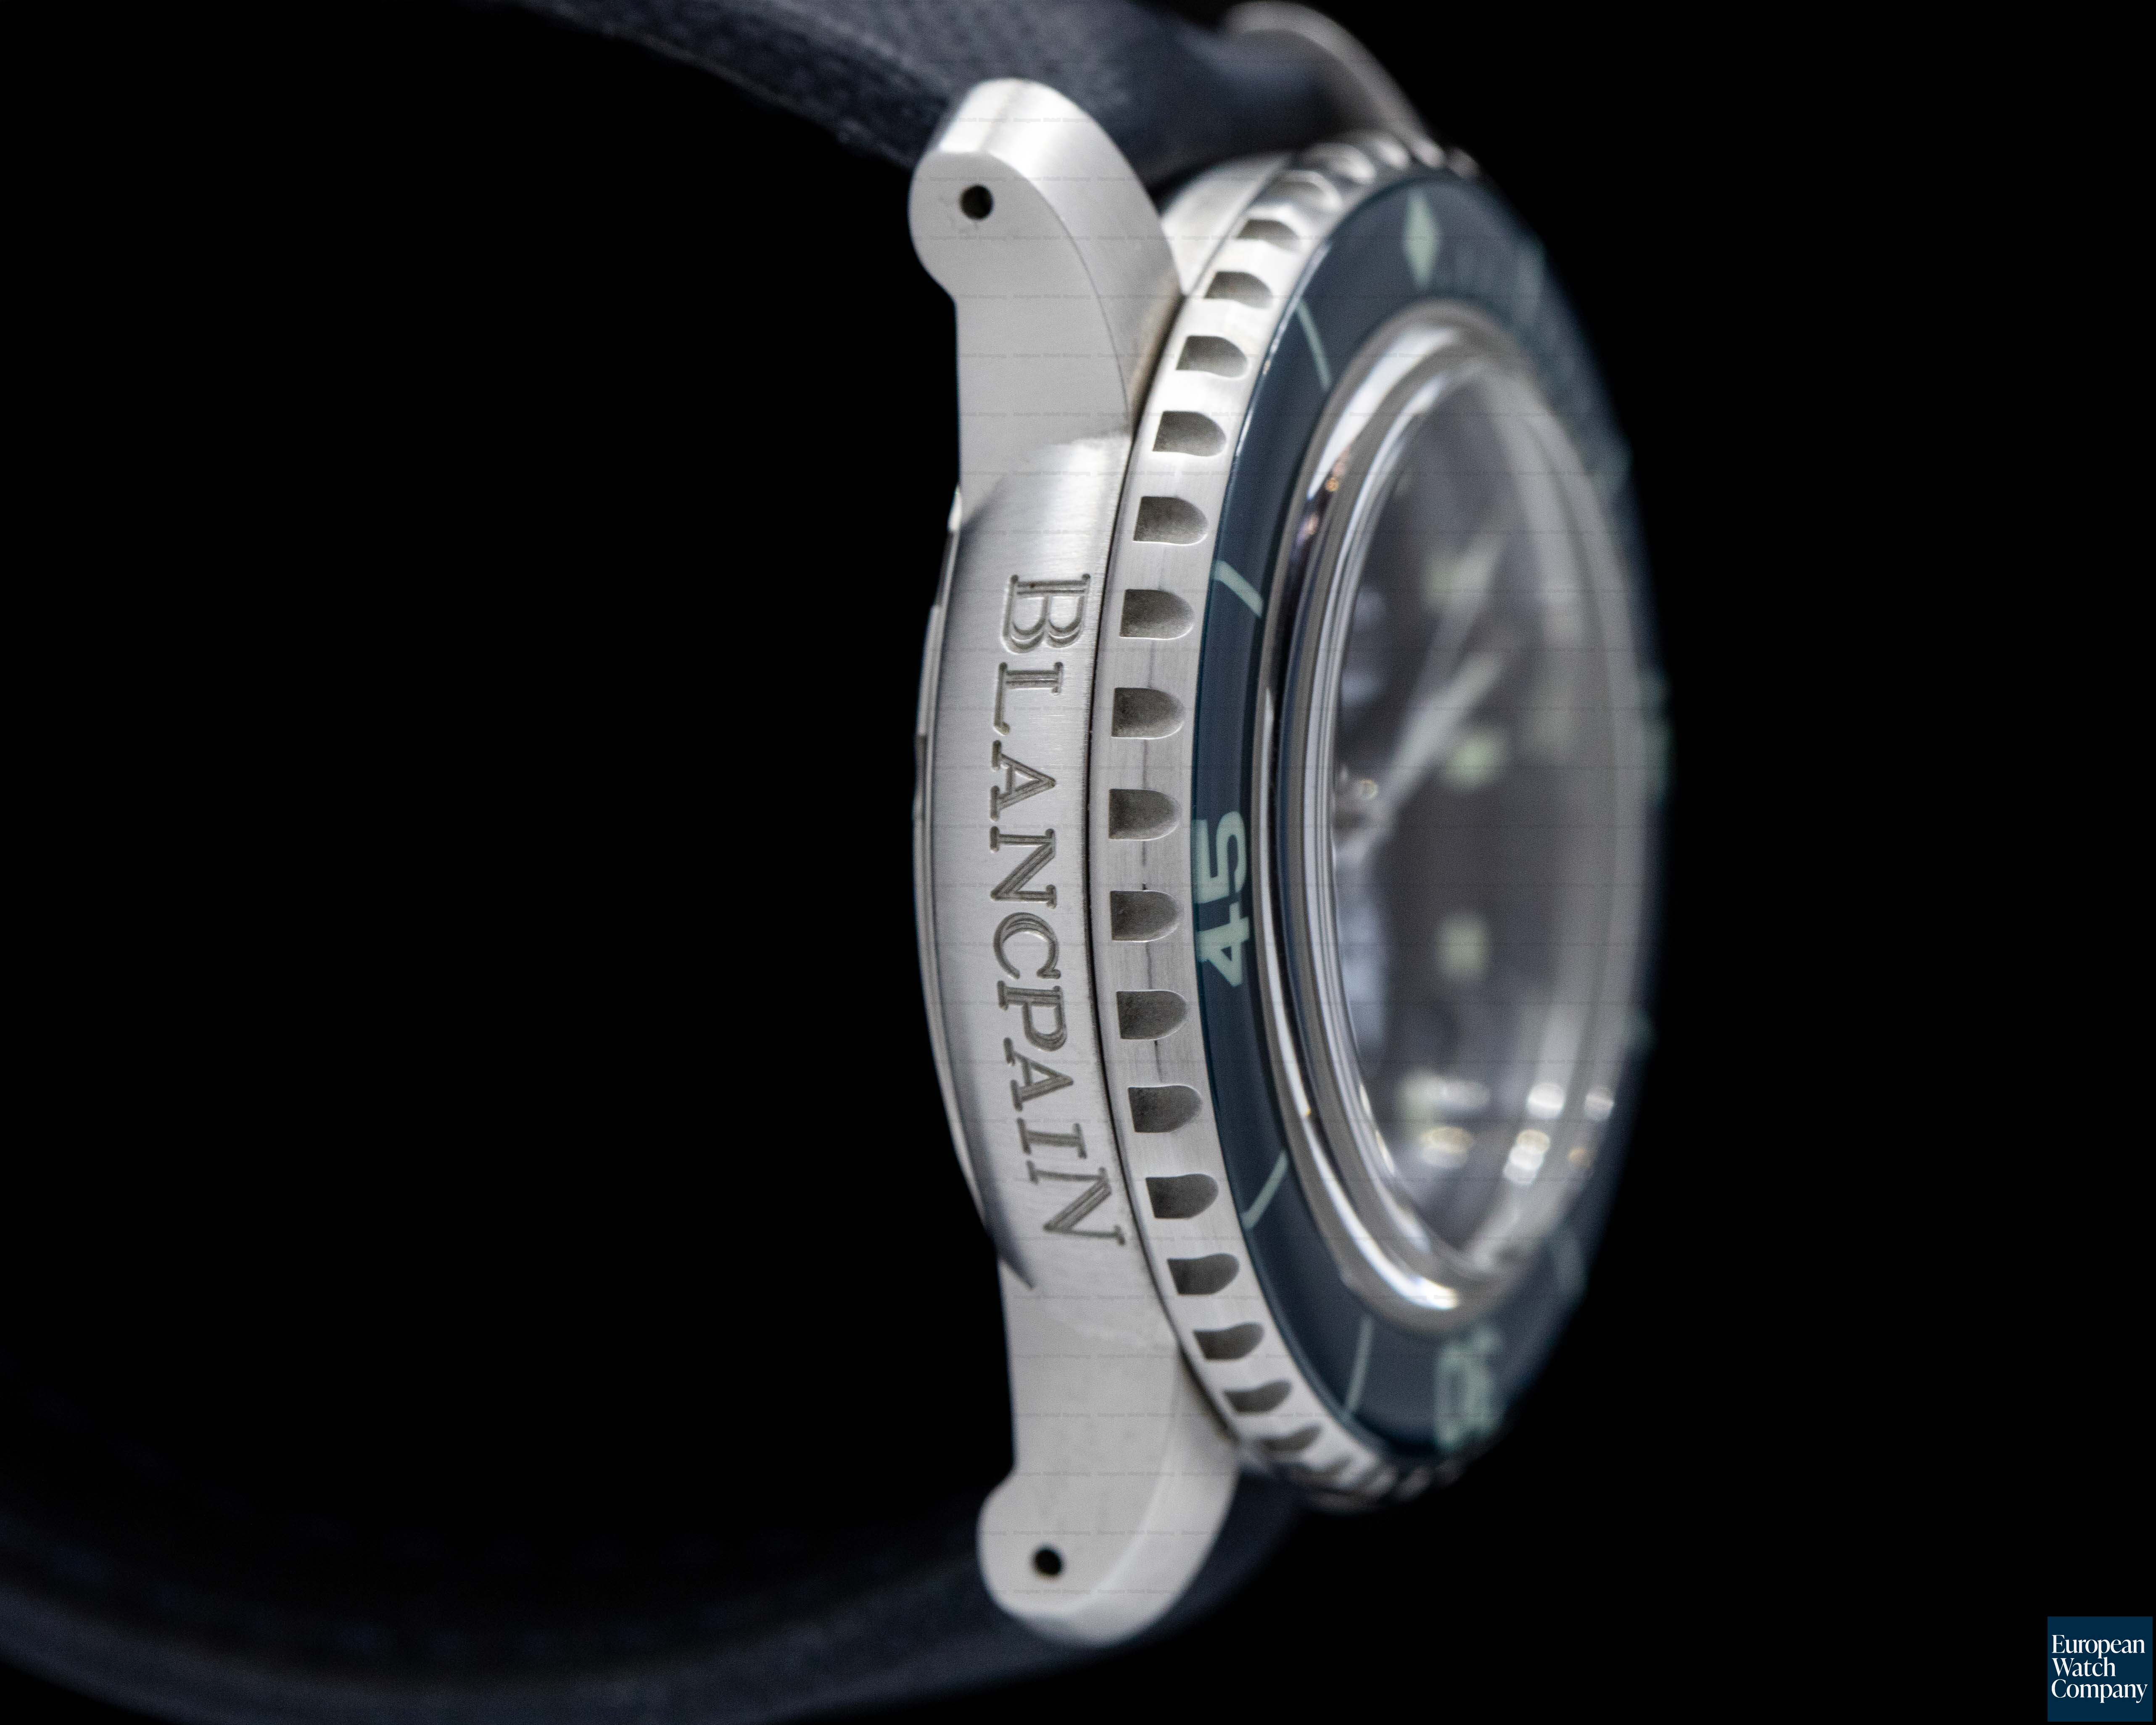 Blancpain Fifty Fathoms Ocean Commitment III Limited Edition Blue Dial Ref. 5008-11B40-52A